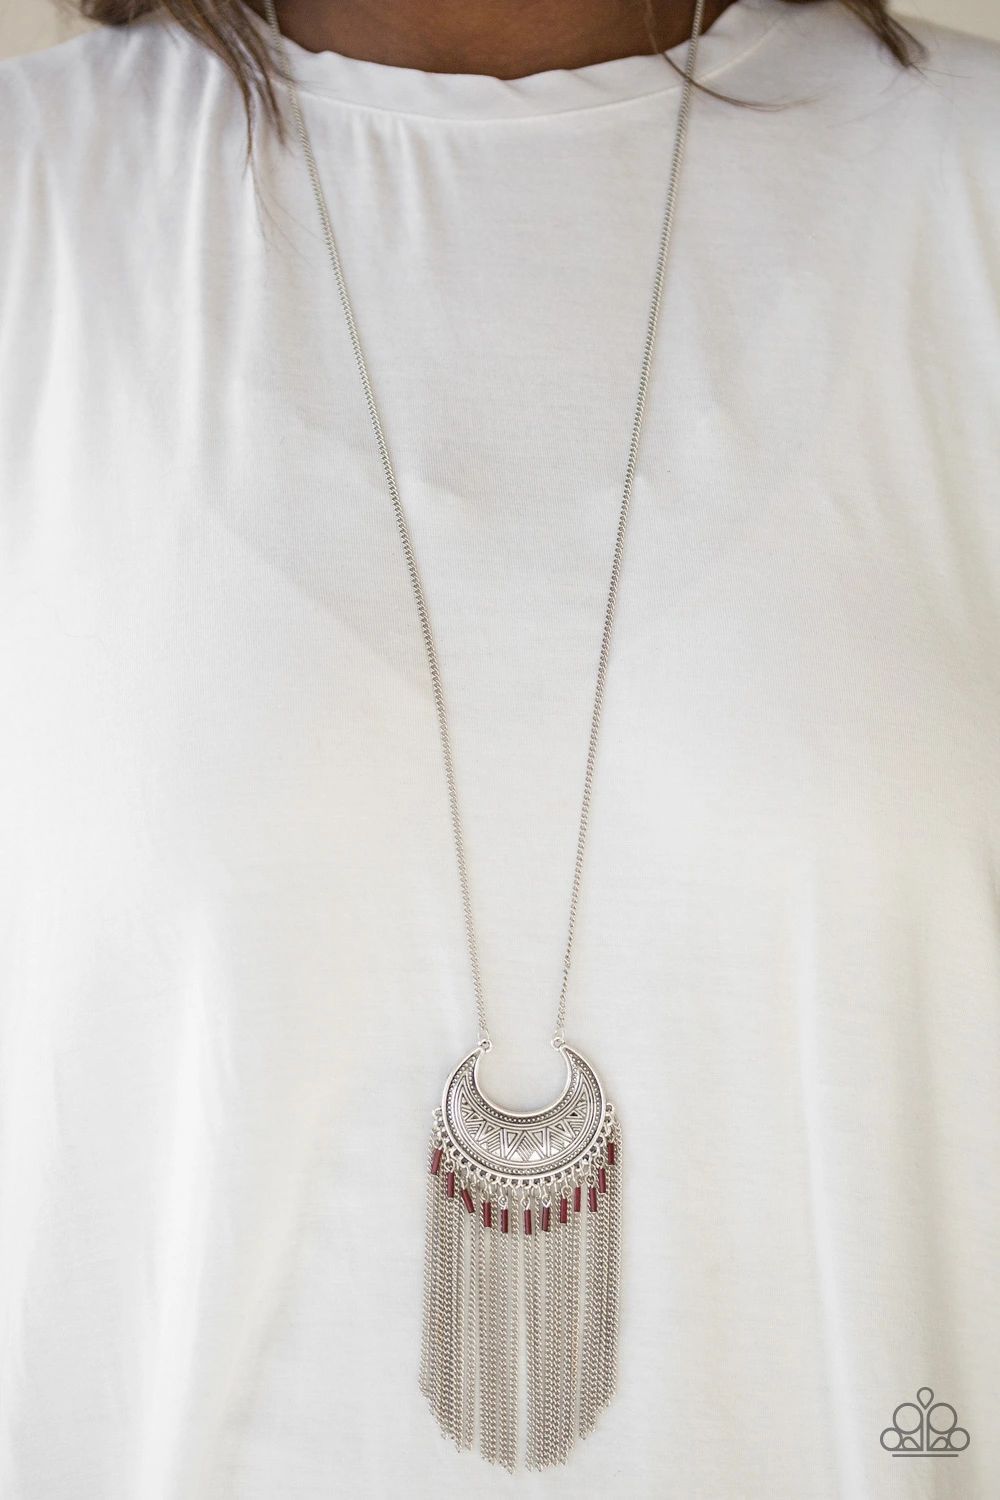 Desert Coyote Brown and Silver Fringe Necklace - Paparazzi Accessories - model -CarasShop.com - $5 Jewelry by Cara Jewels